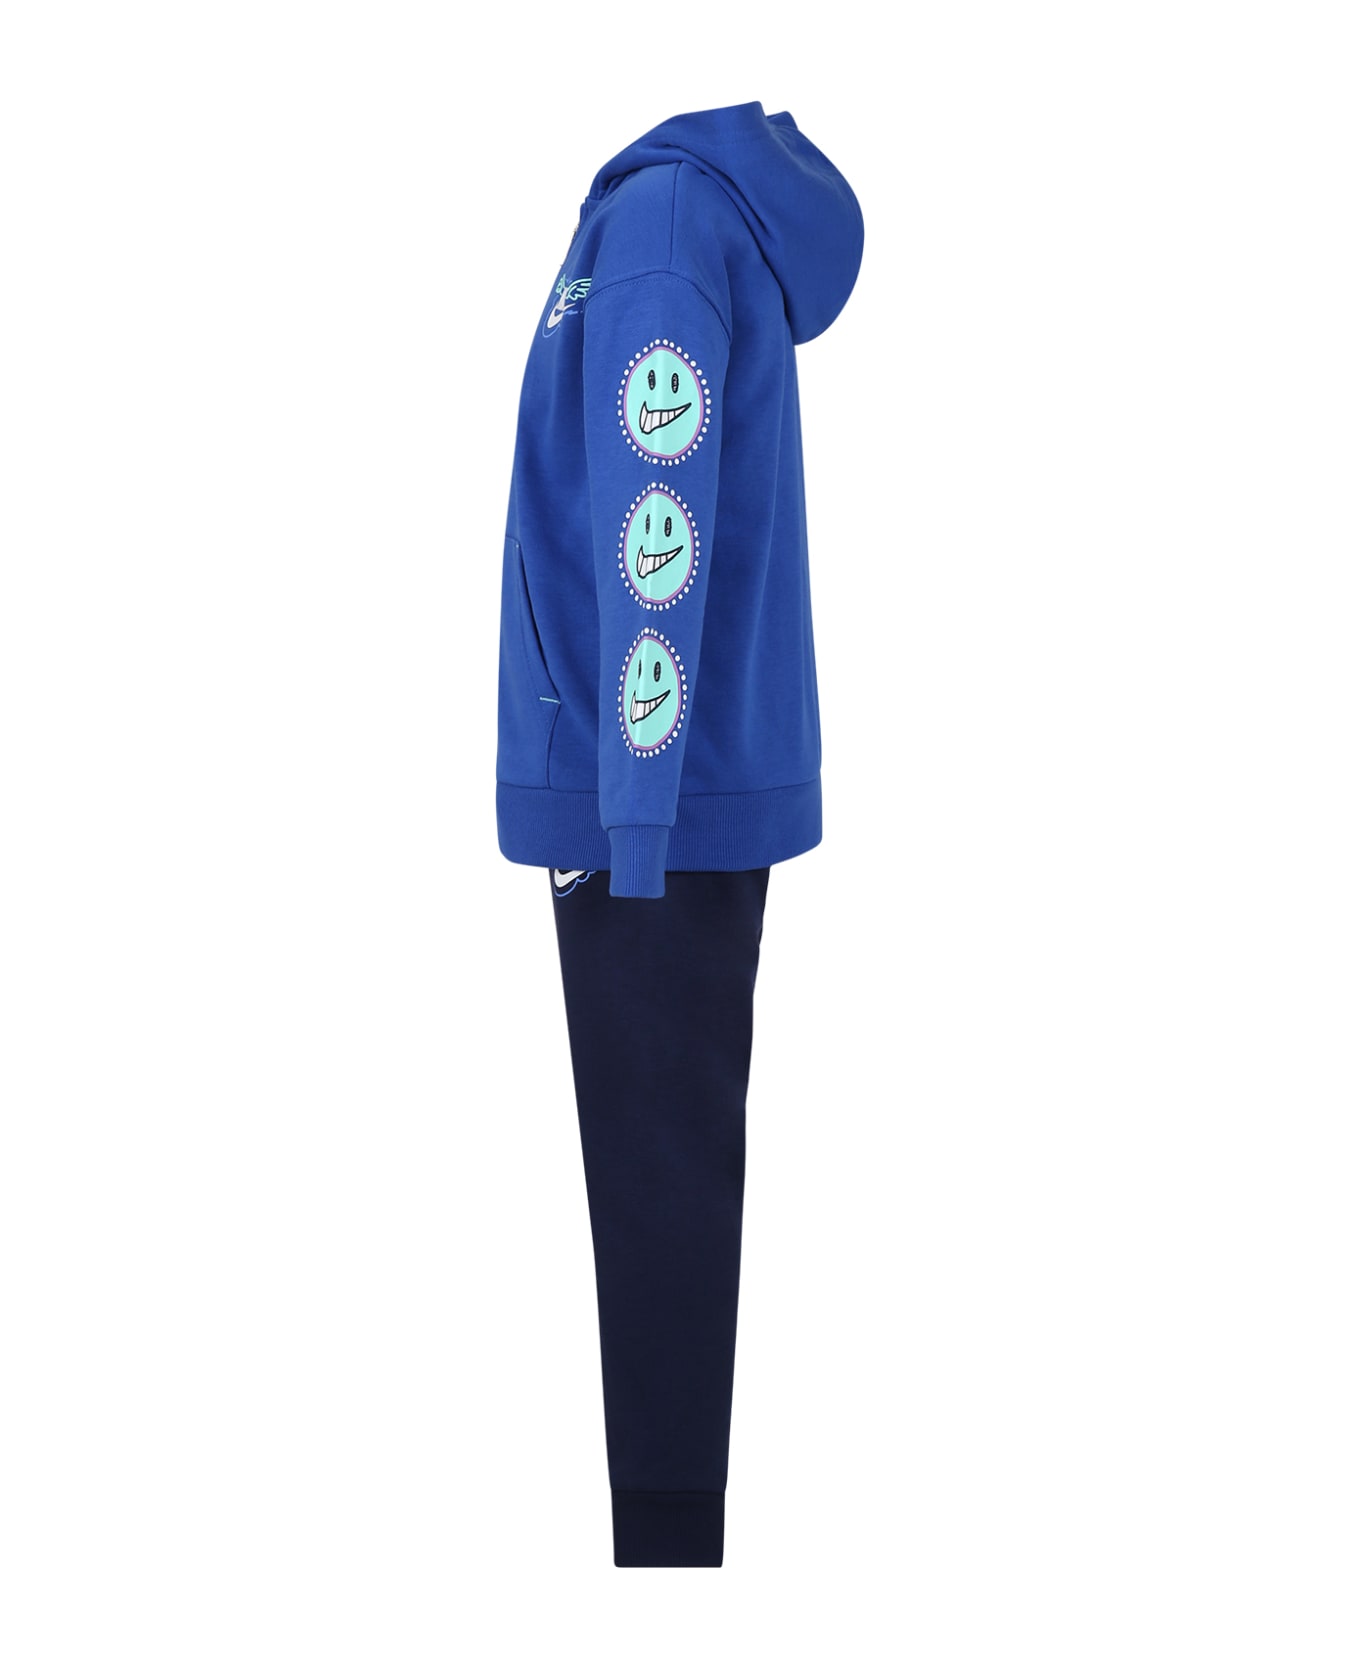 Nike Blue Tracksuit For Boy With Logo - Blue ボトムス